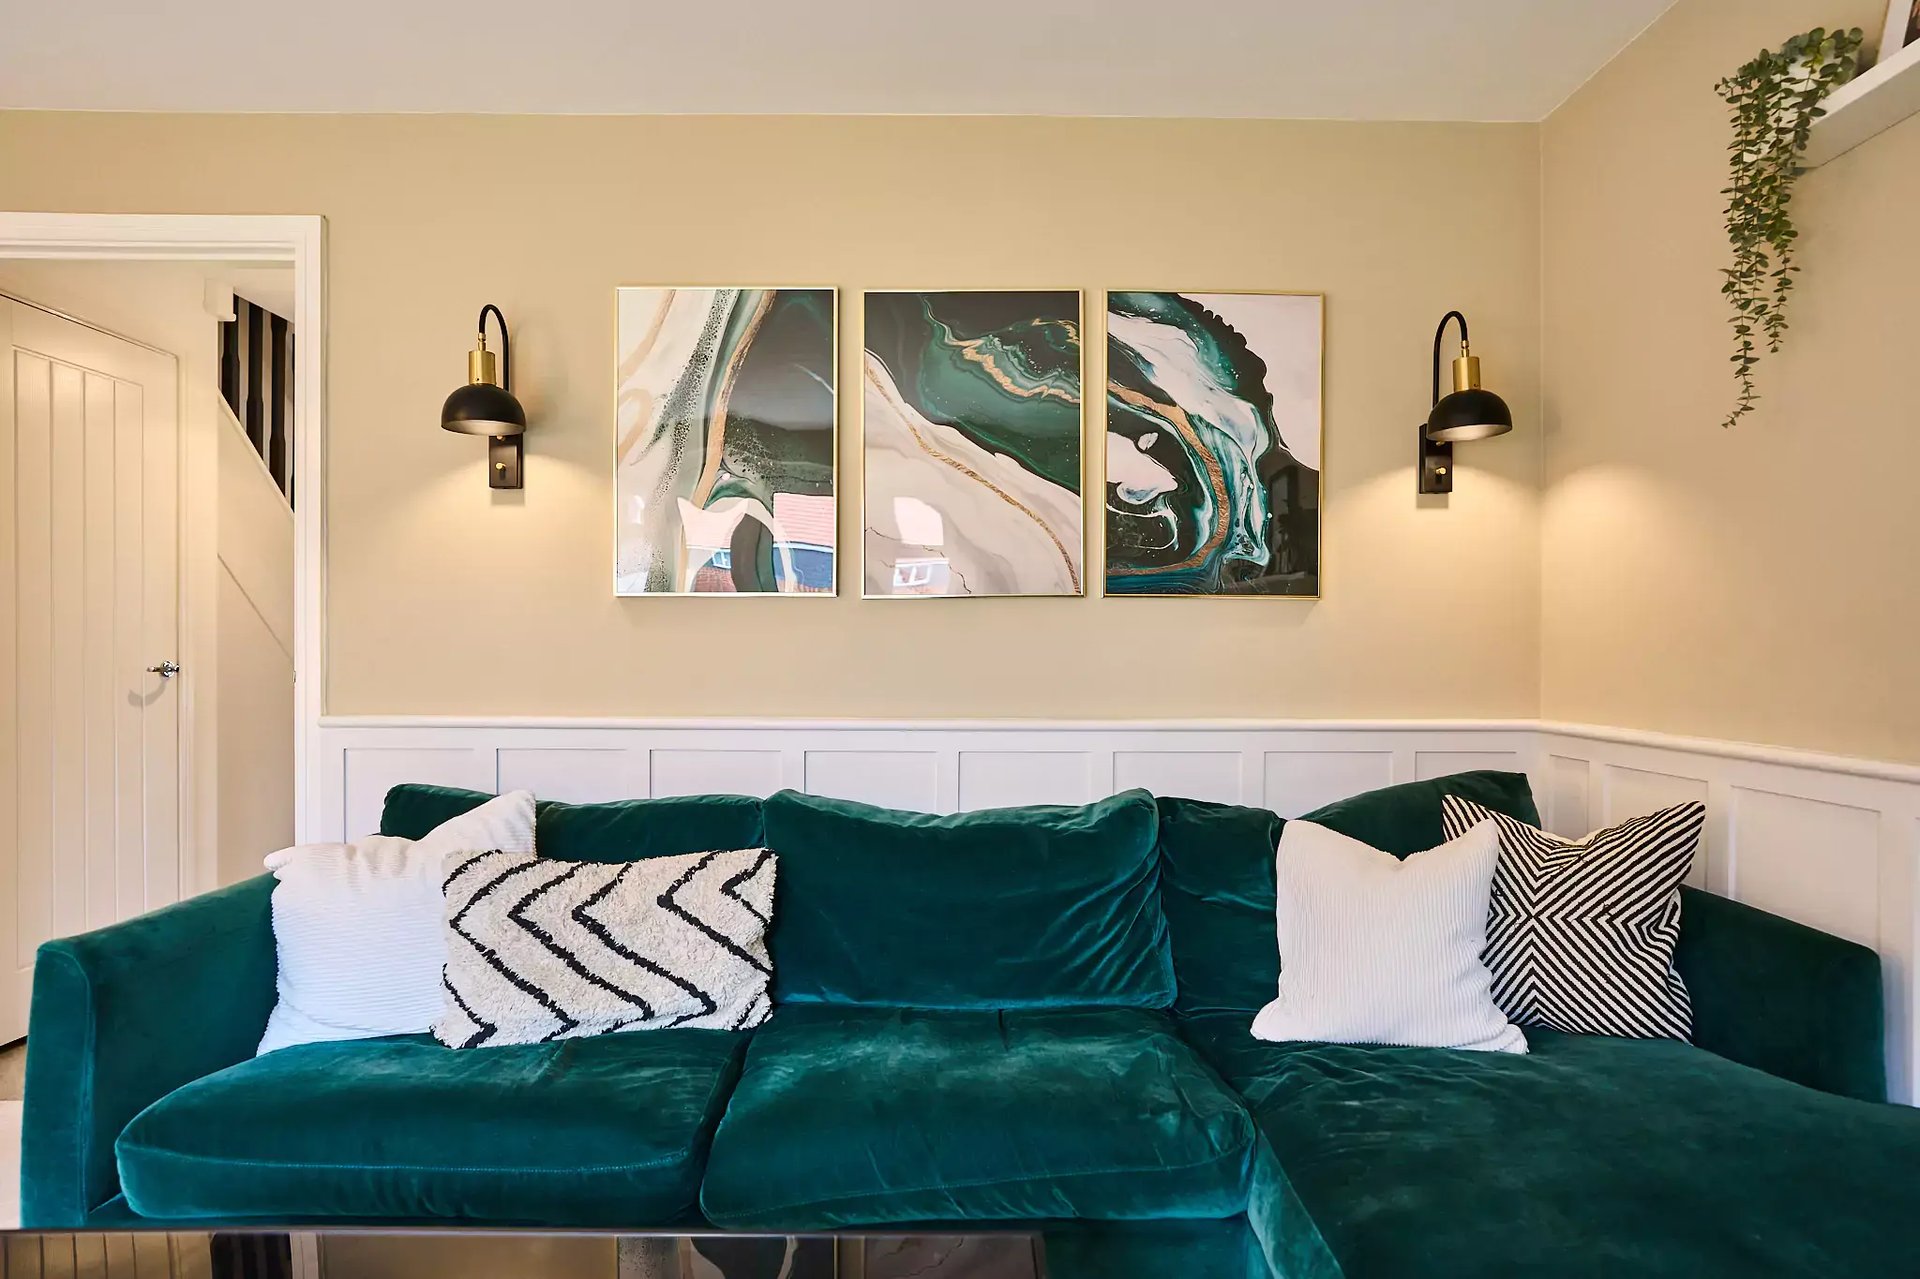 Cosy living room with emerald accents